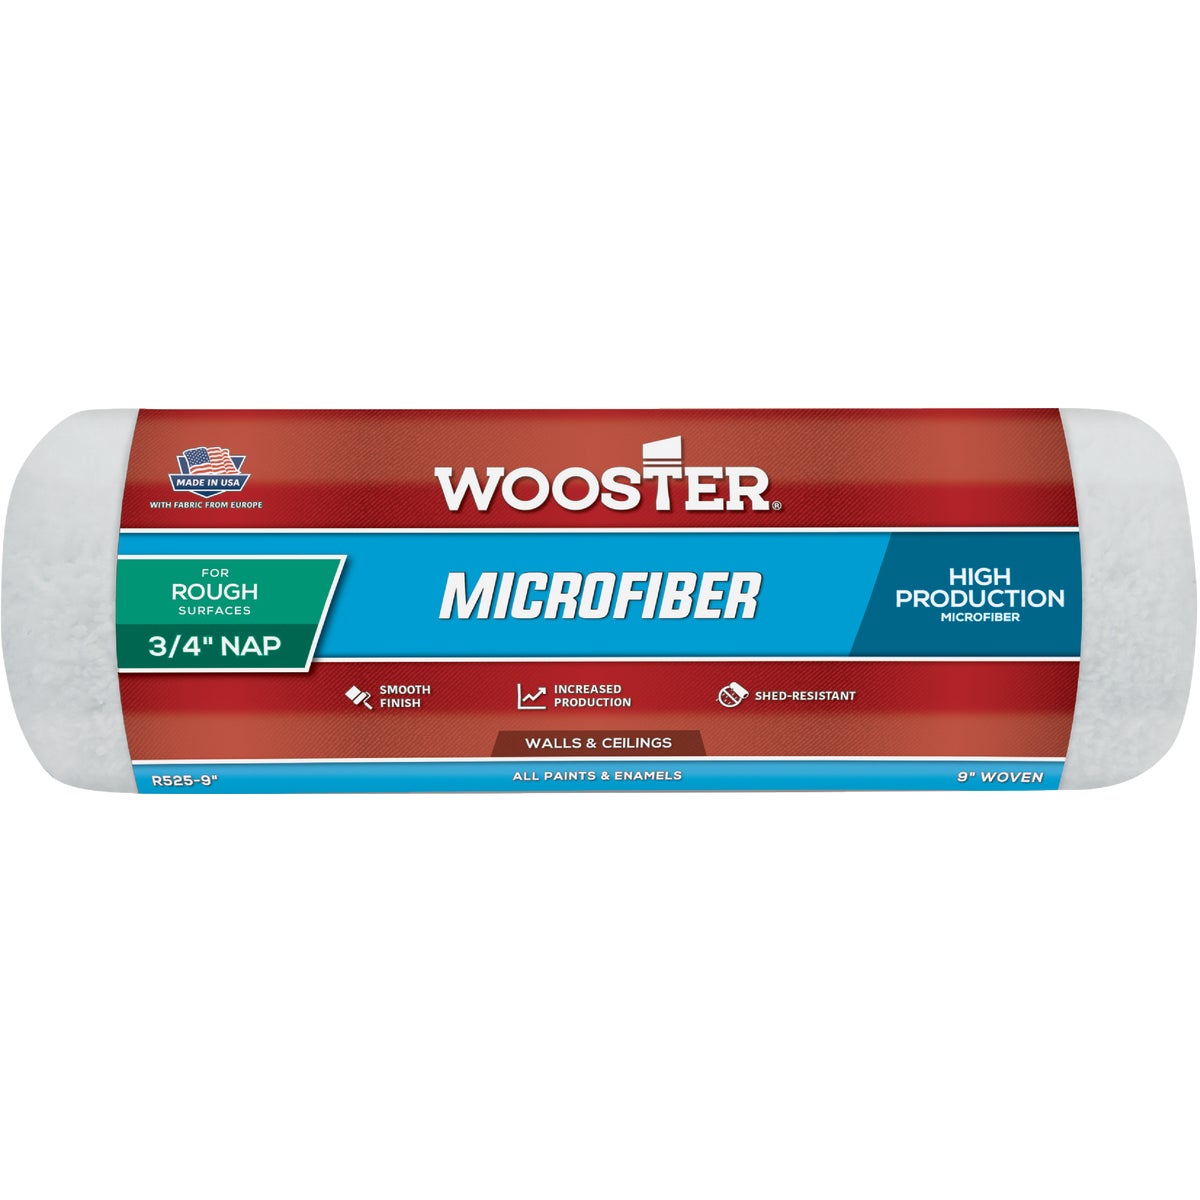 Wooster 9 In. x 3/4 In. Microfiber Roller Cover